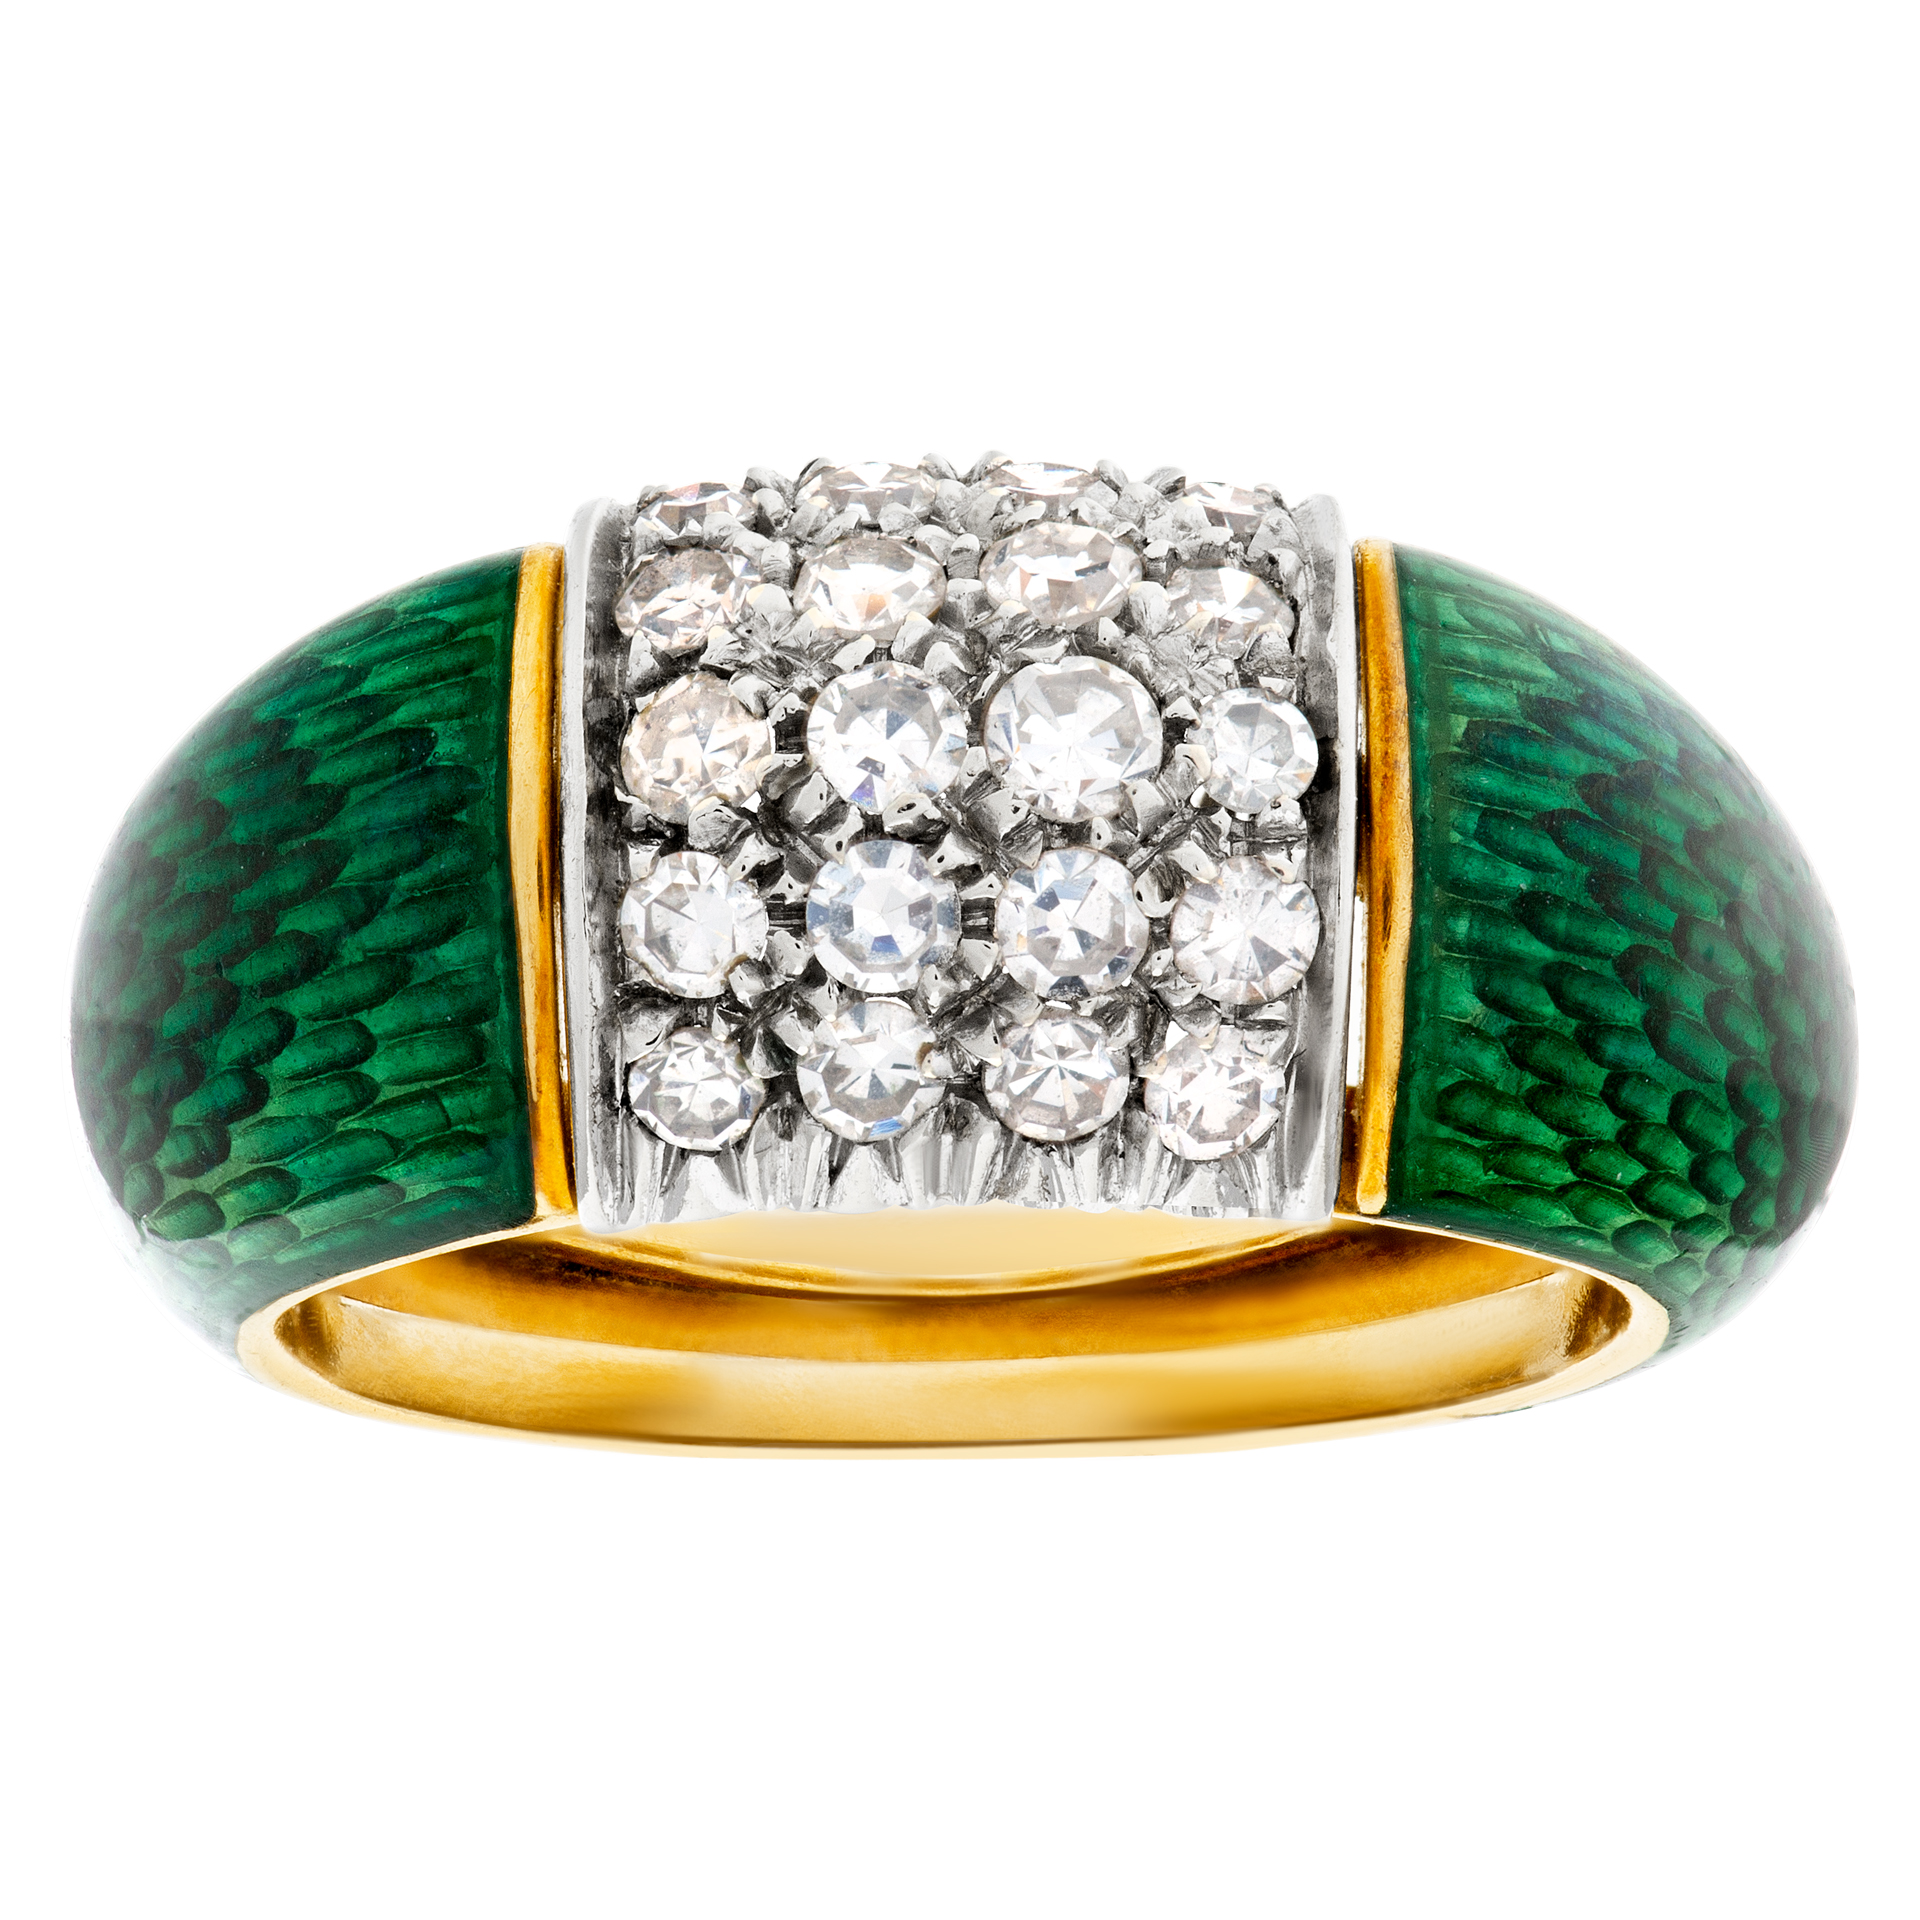 Enamel ring In 18k with pave diamonds. Size 4.5